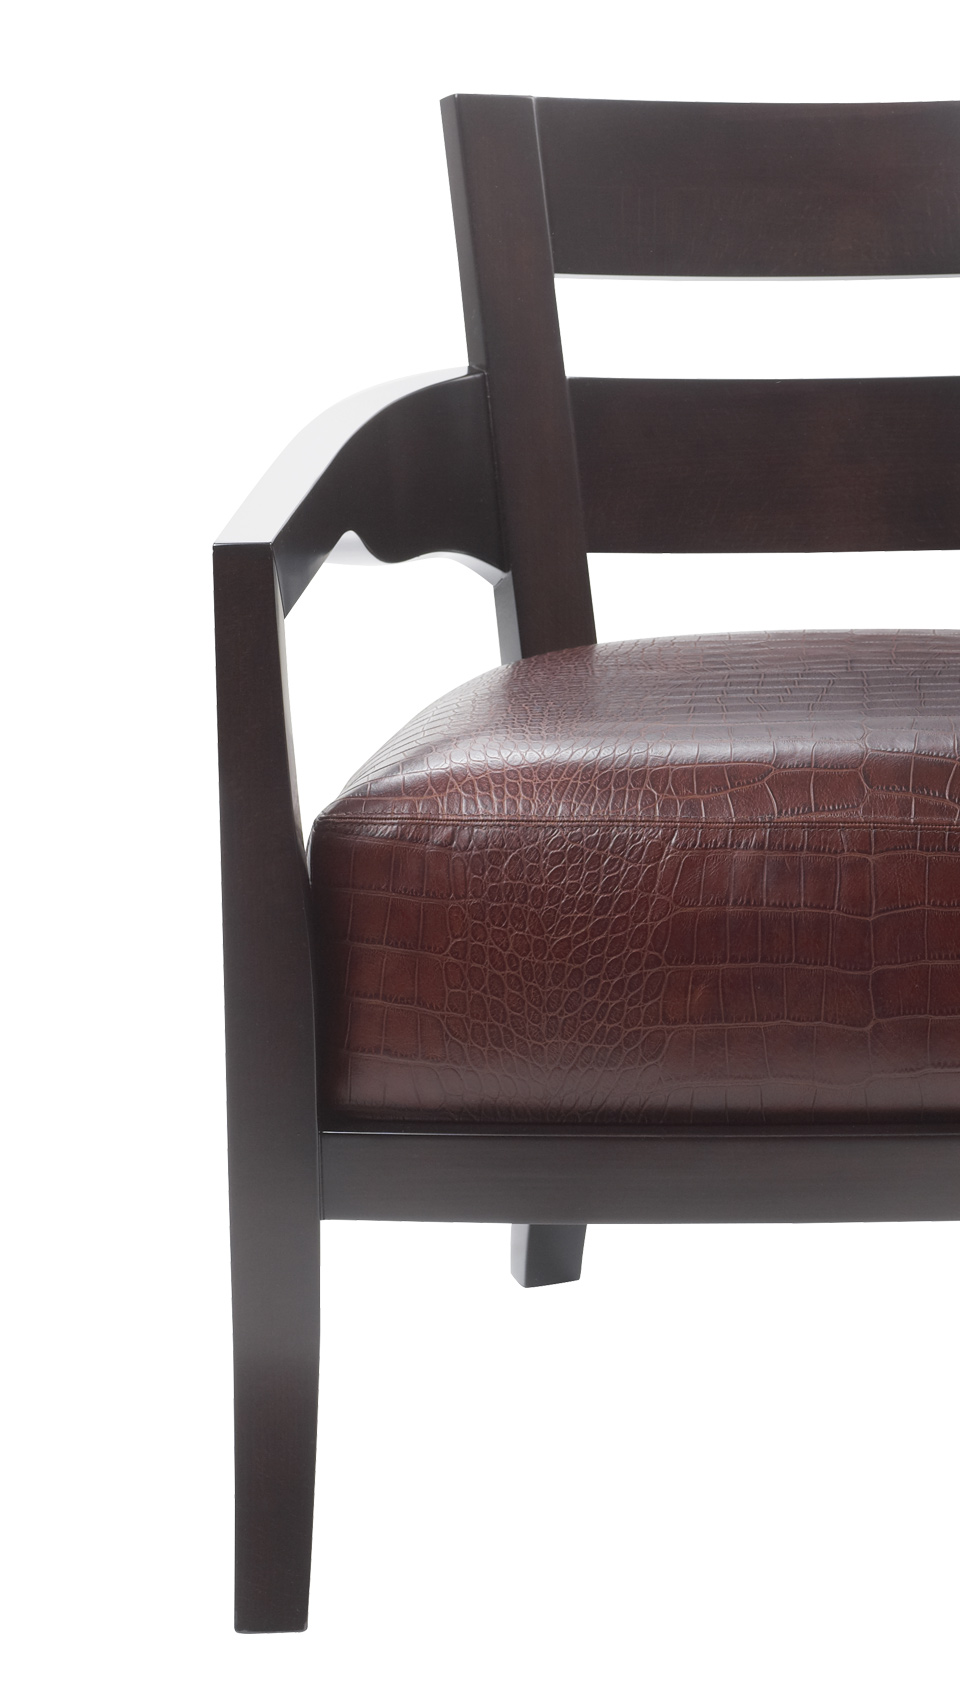 Detail of Africa, a wooden armchair covered in fabric or leather, from Promemoria's catalogue | Promemoria